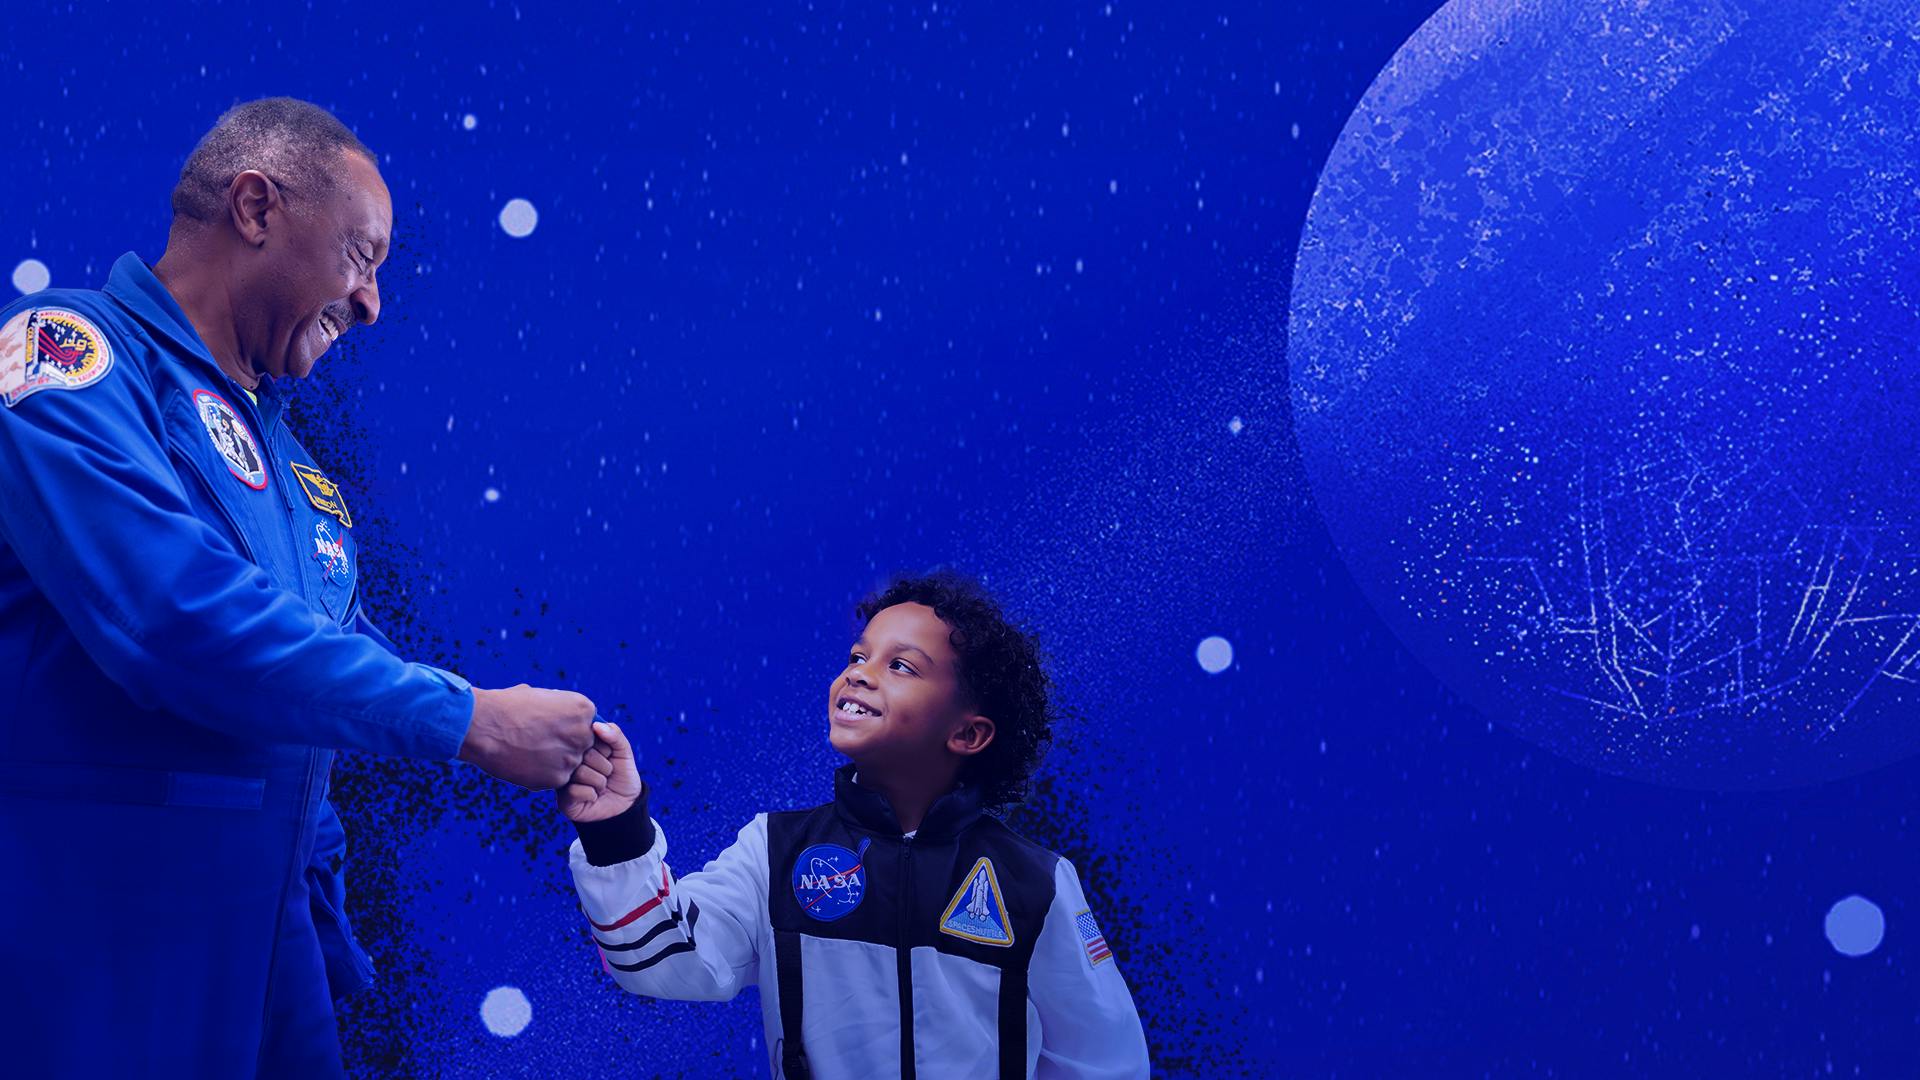 A child gives a fist bump to a man in a blue NASA astronaut jumpsuit